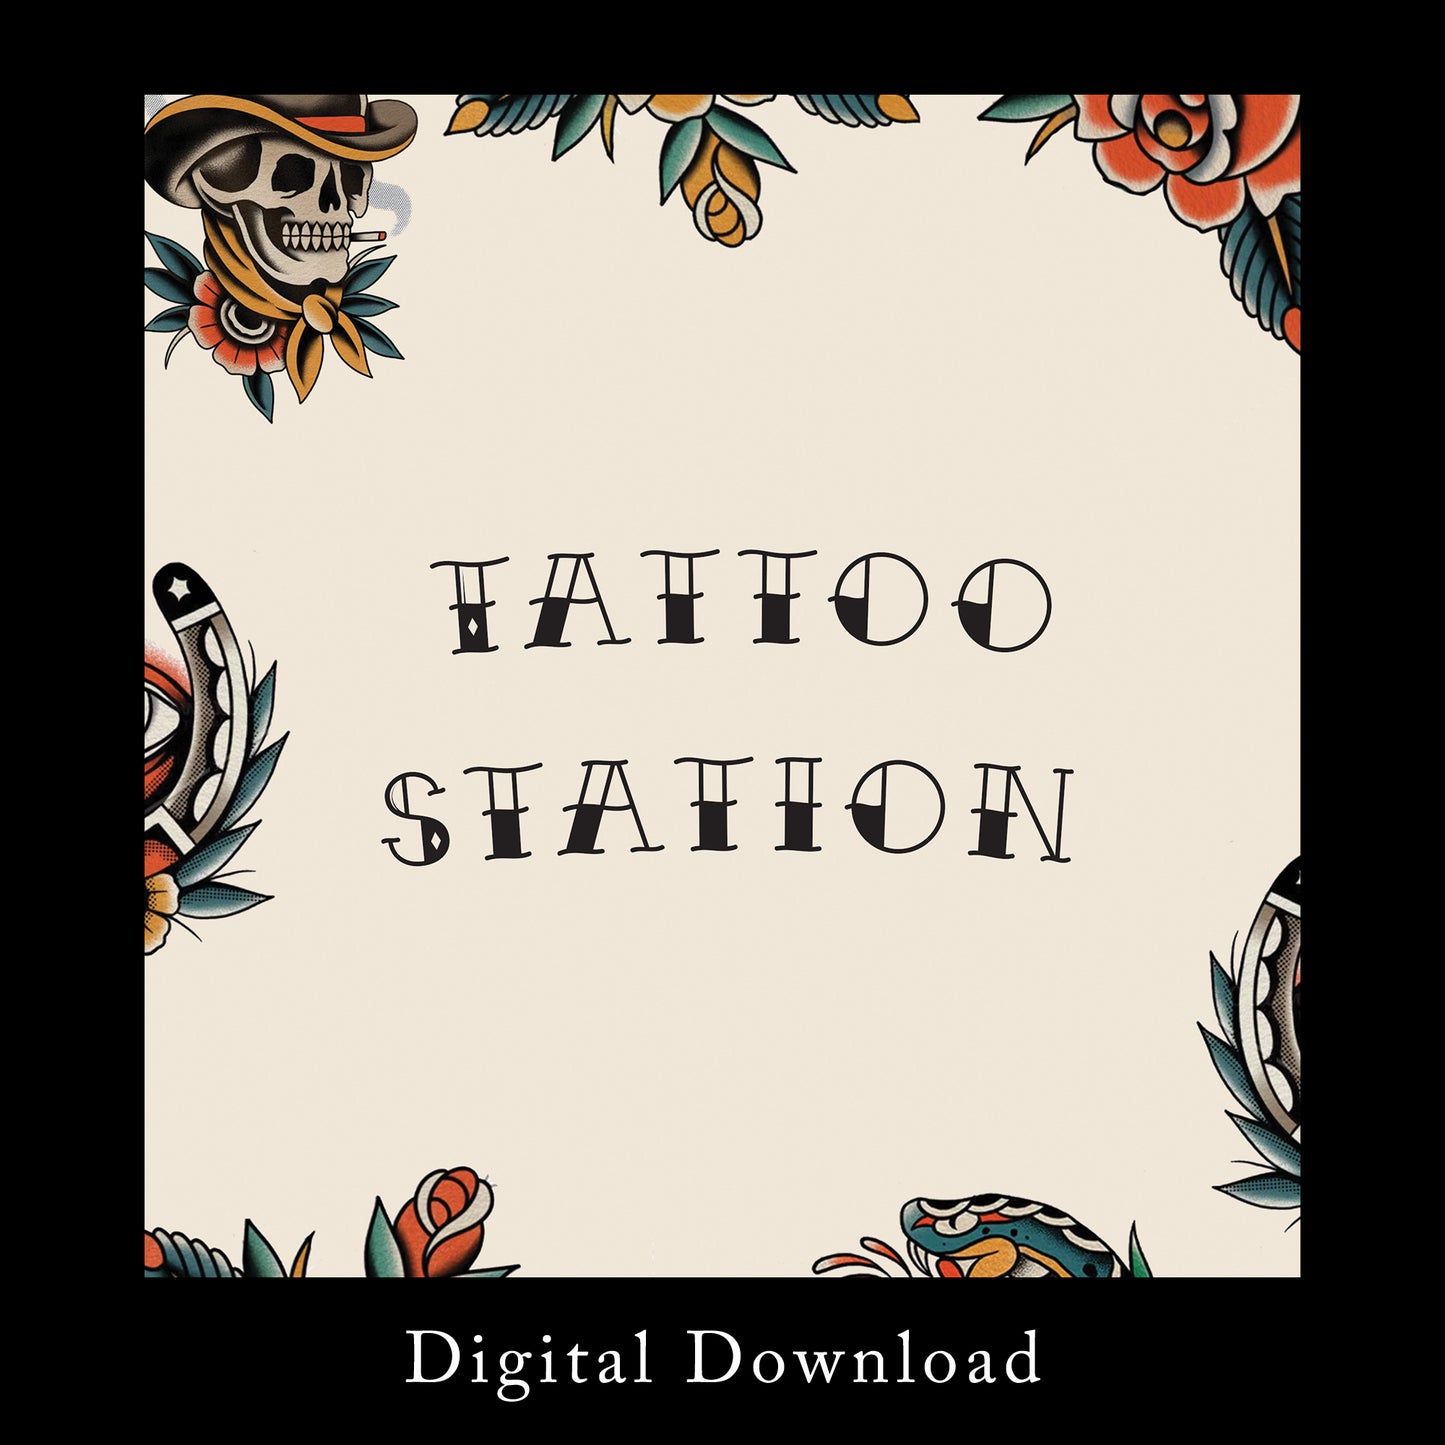 Tattoo station print out for alt wedding or party